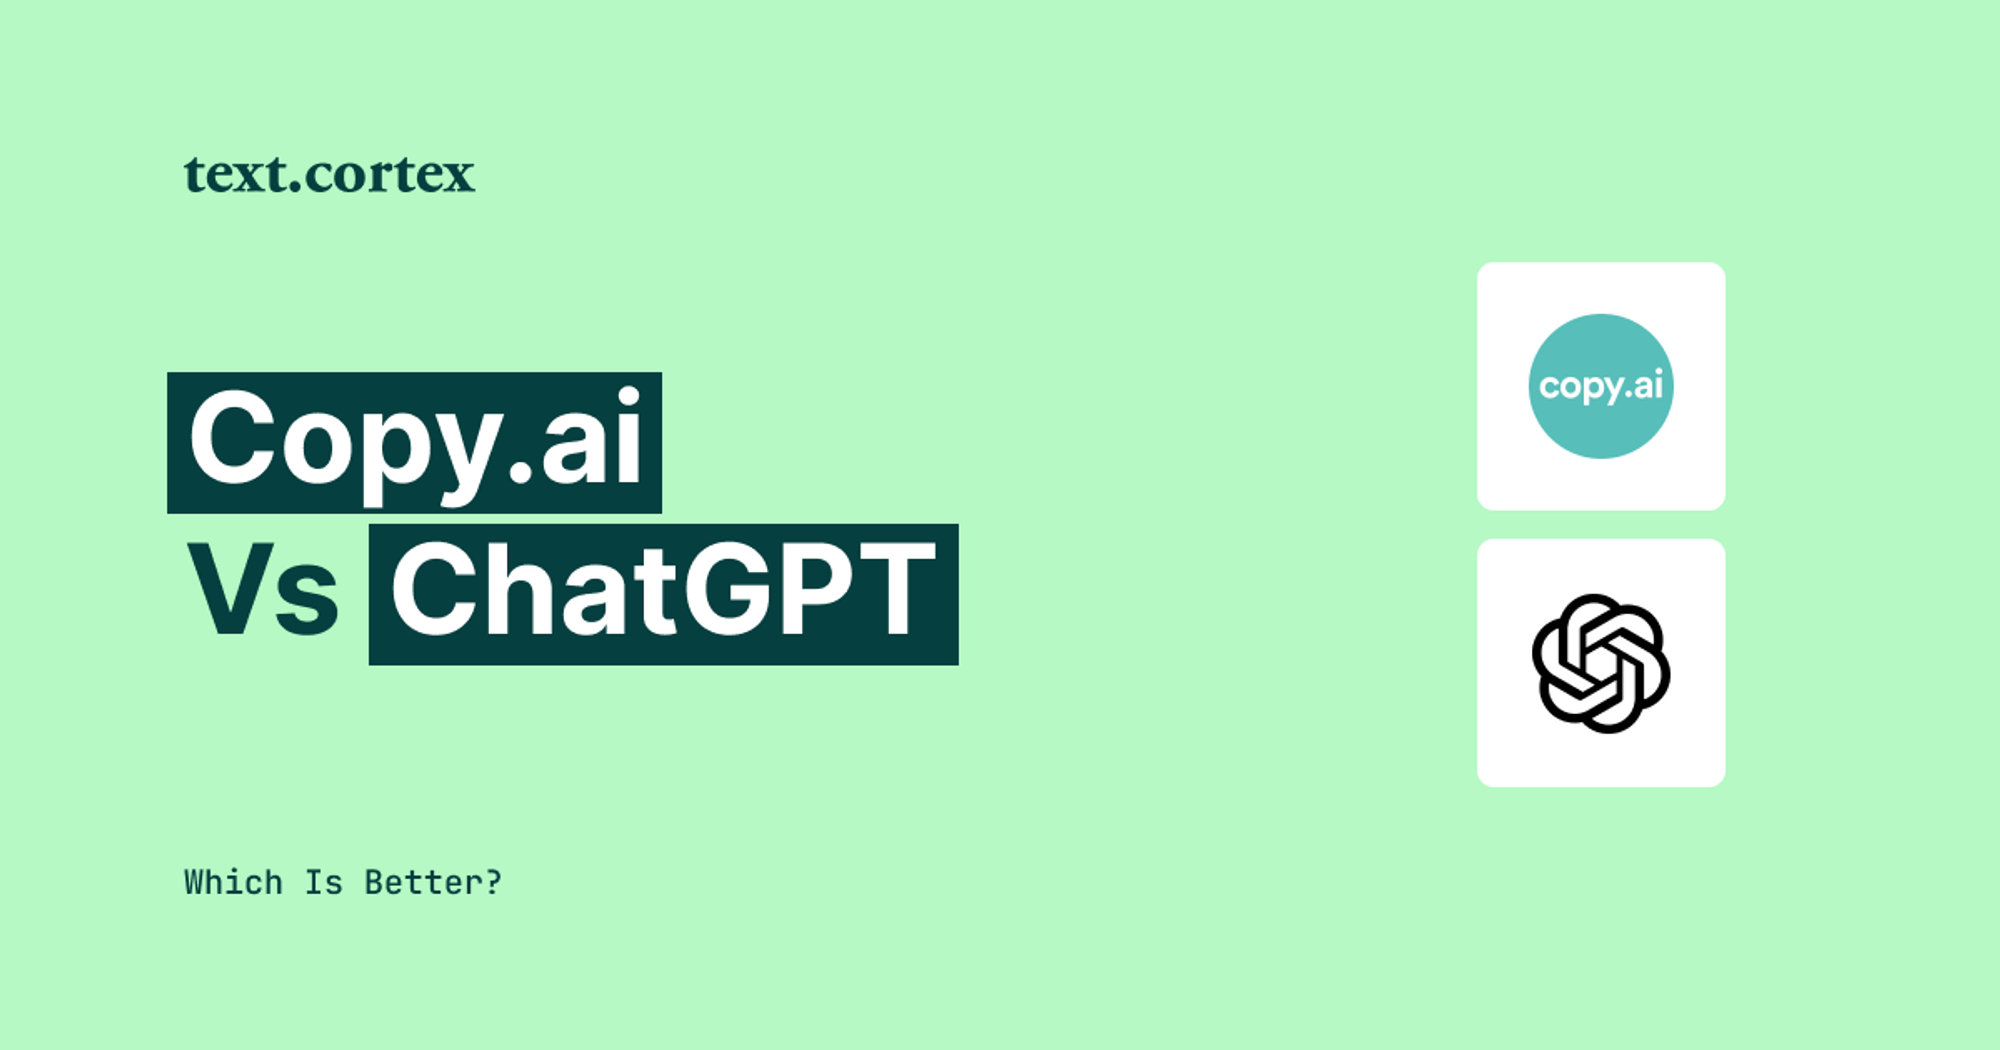 Copy.ai vs ChatGPT - Which is Better?